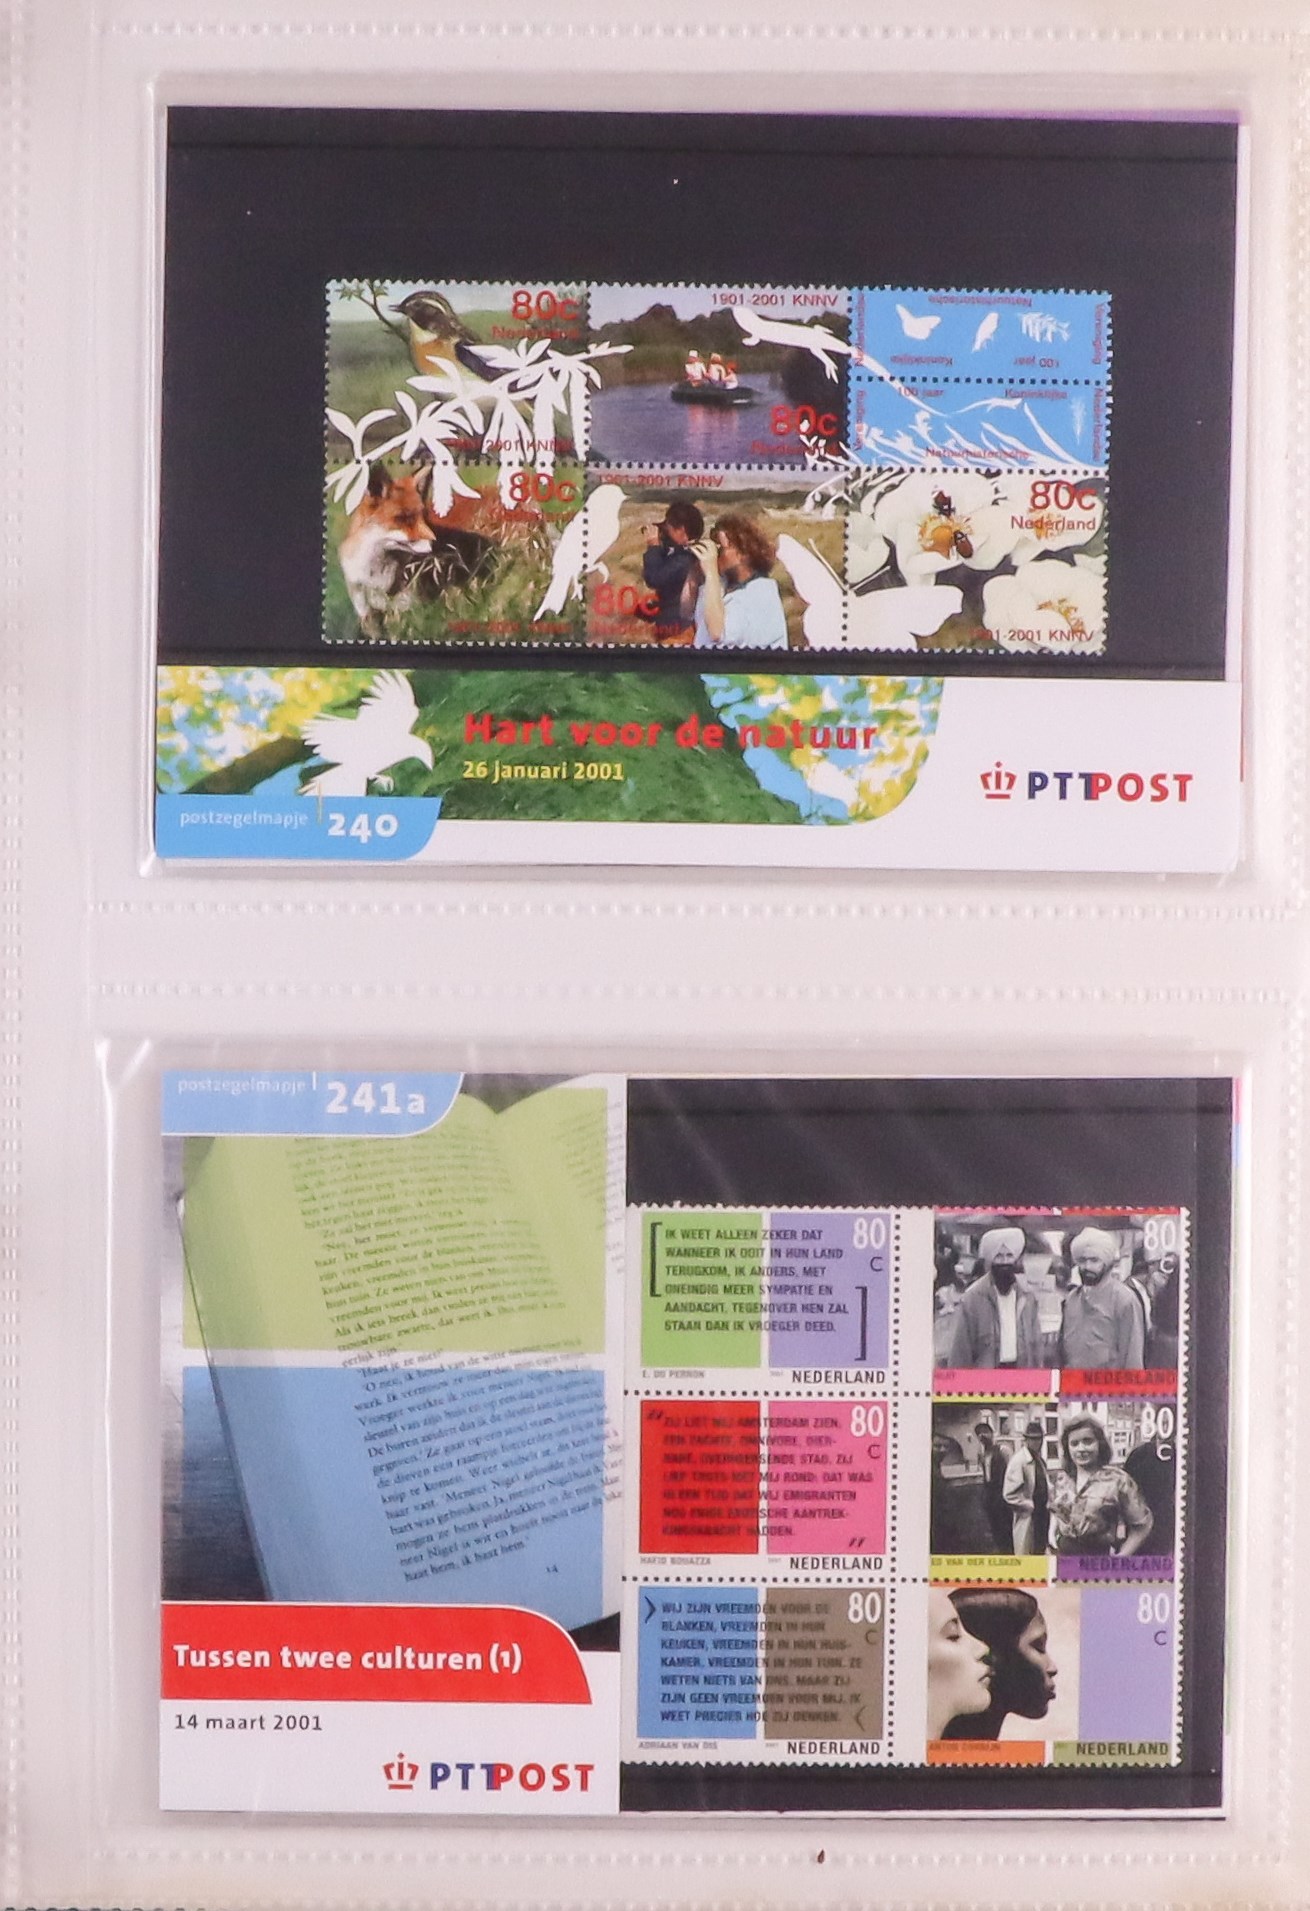 NETHERLANDS 1982-2001 PRESENTATION PACKS Complete run in five special albums, numbers 1 to 246b, - Image 7 of 9